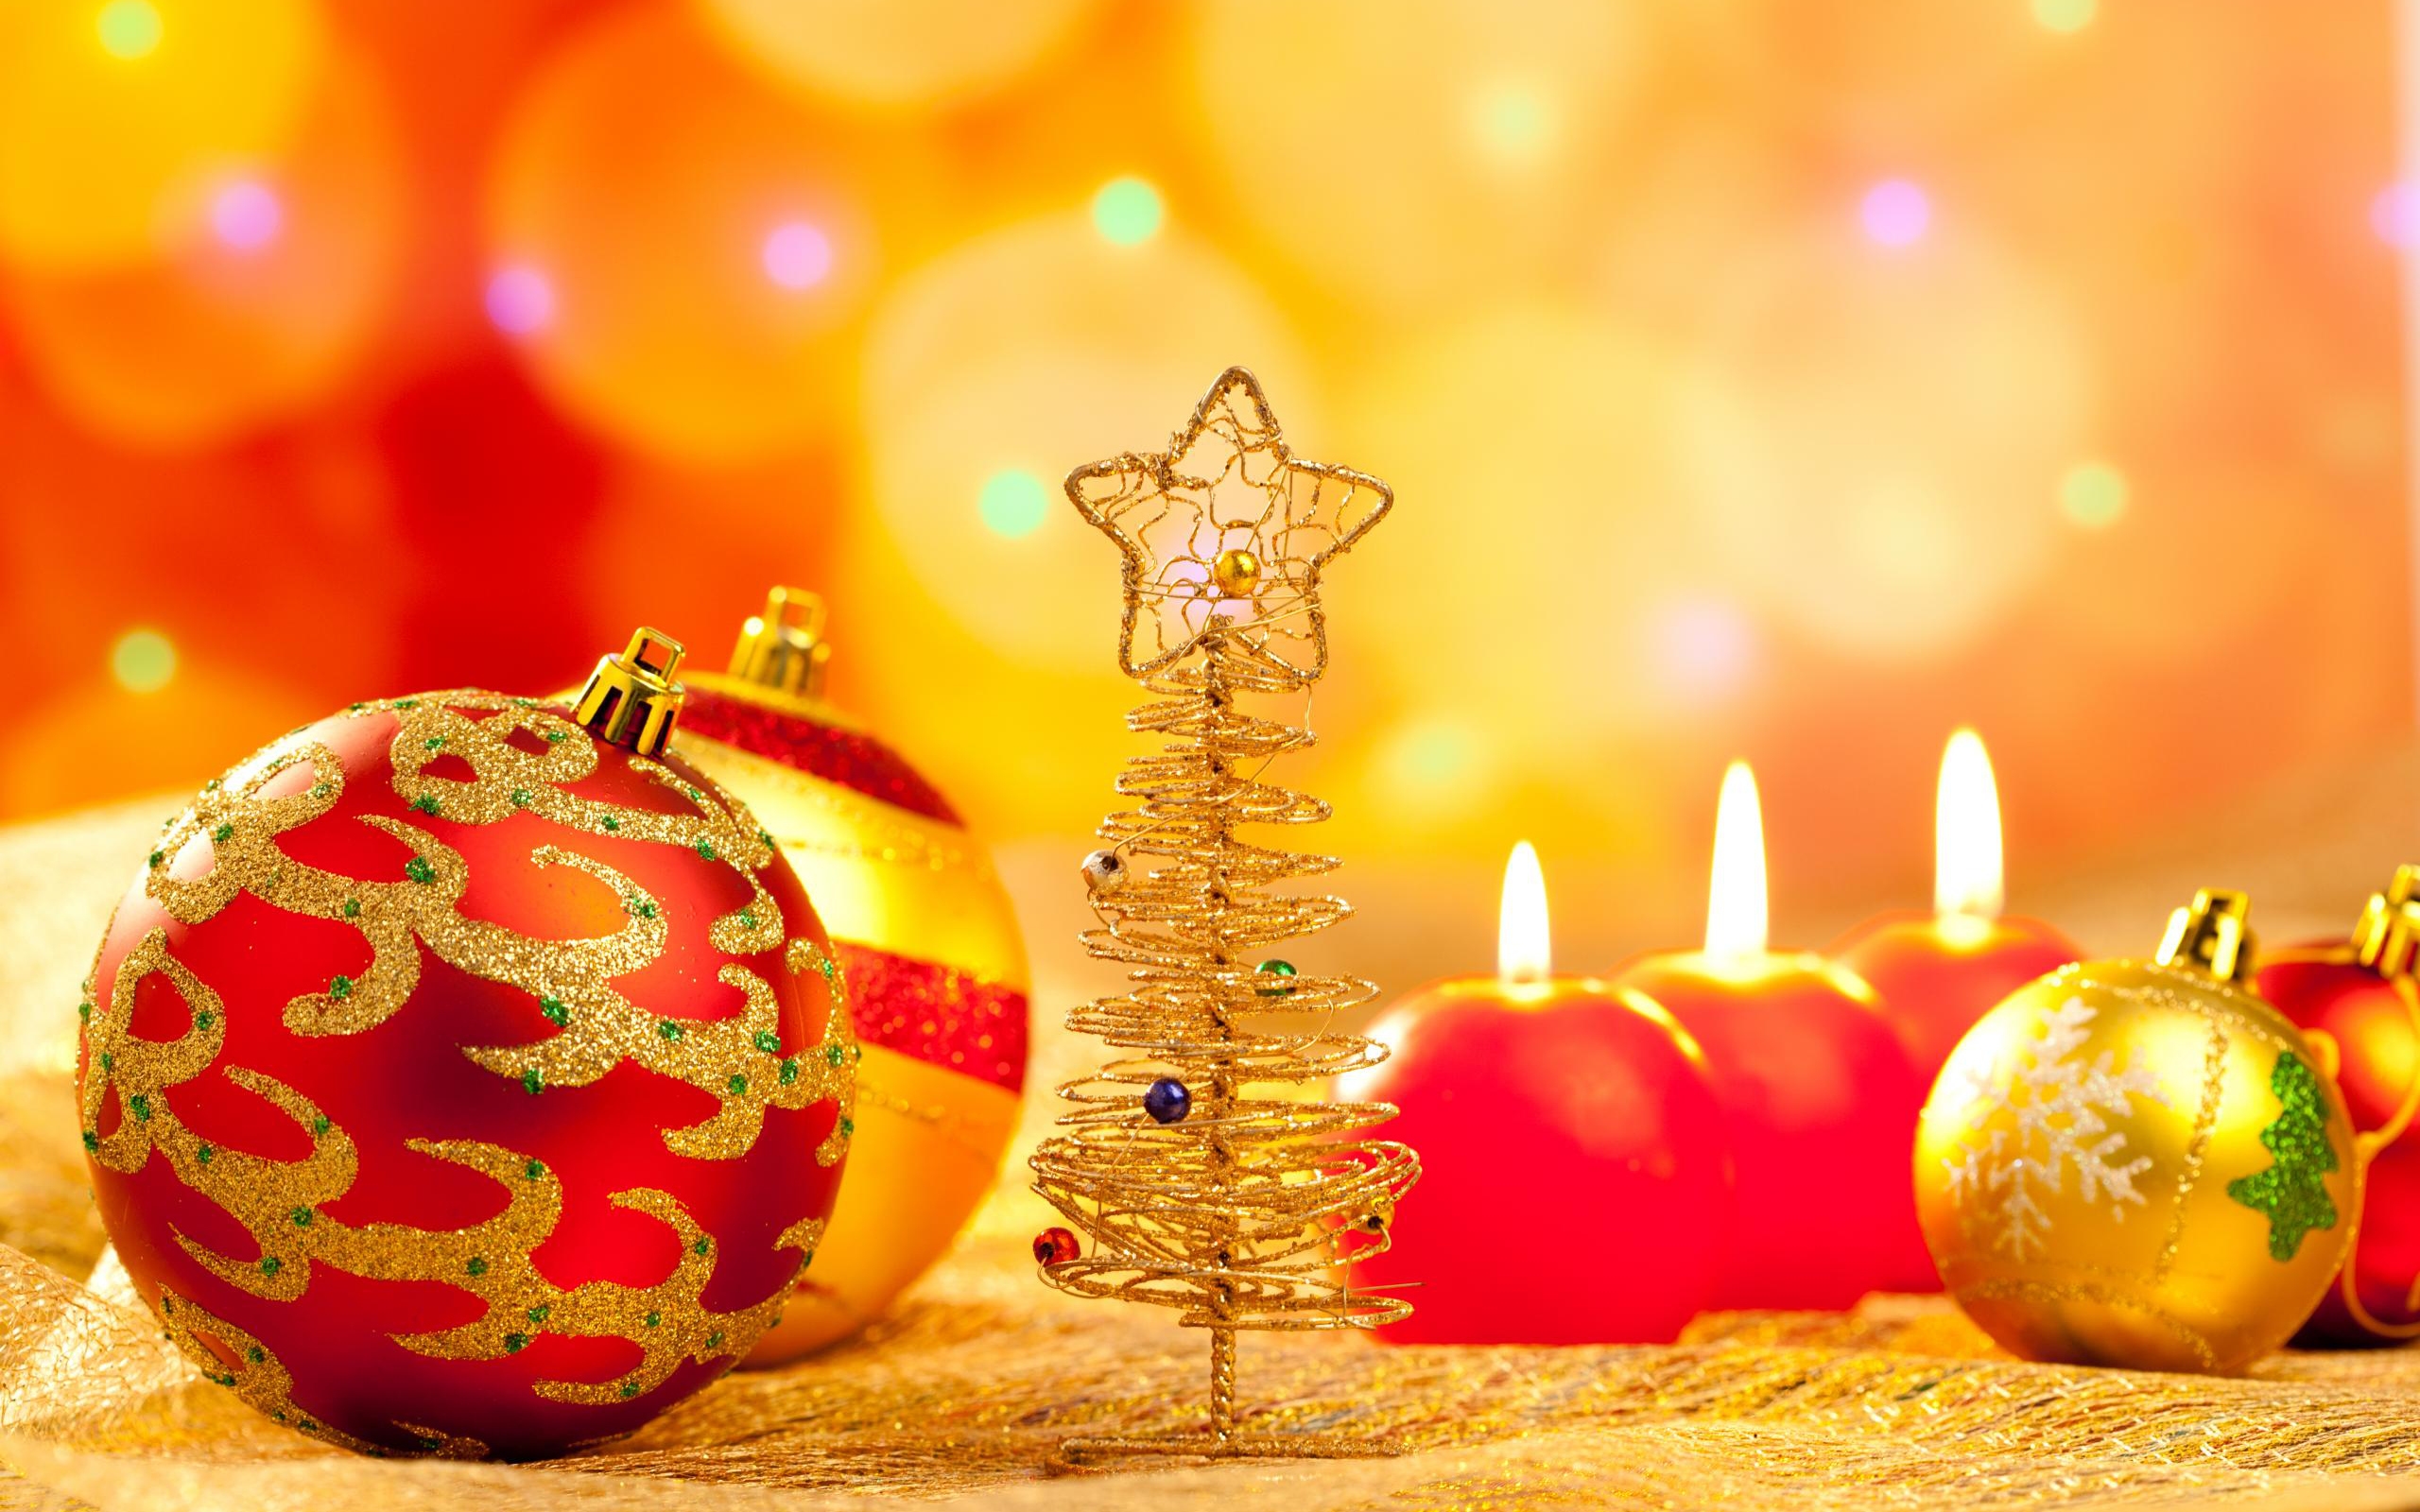 Special Christmas Ornaments for 2560 x 1600 widescreen resolution